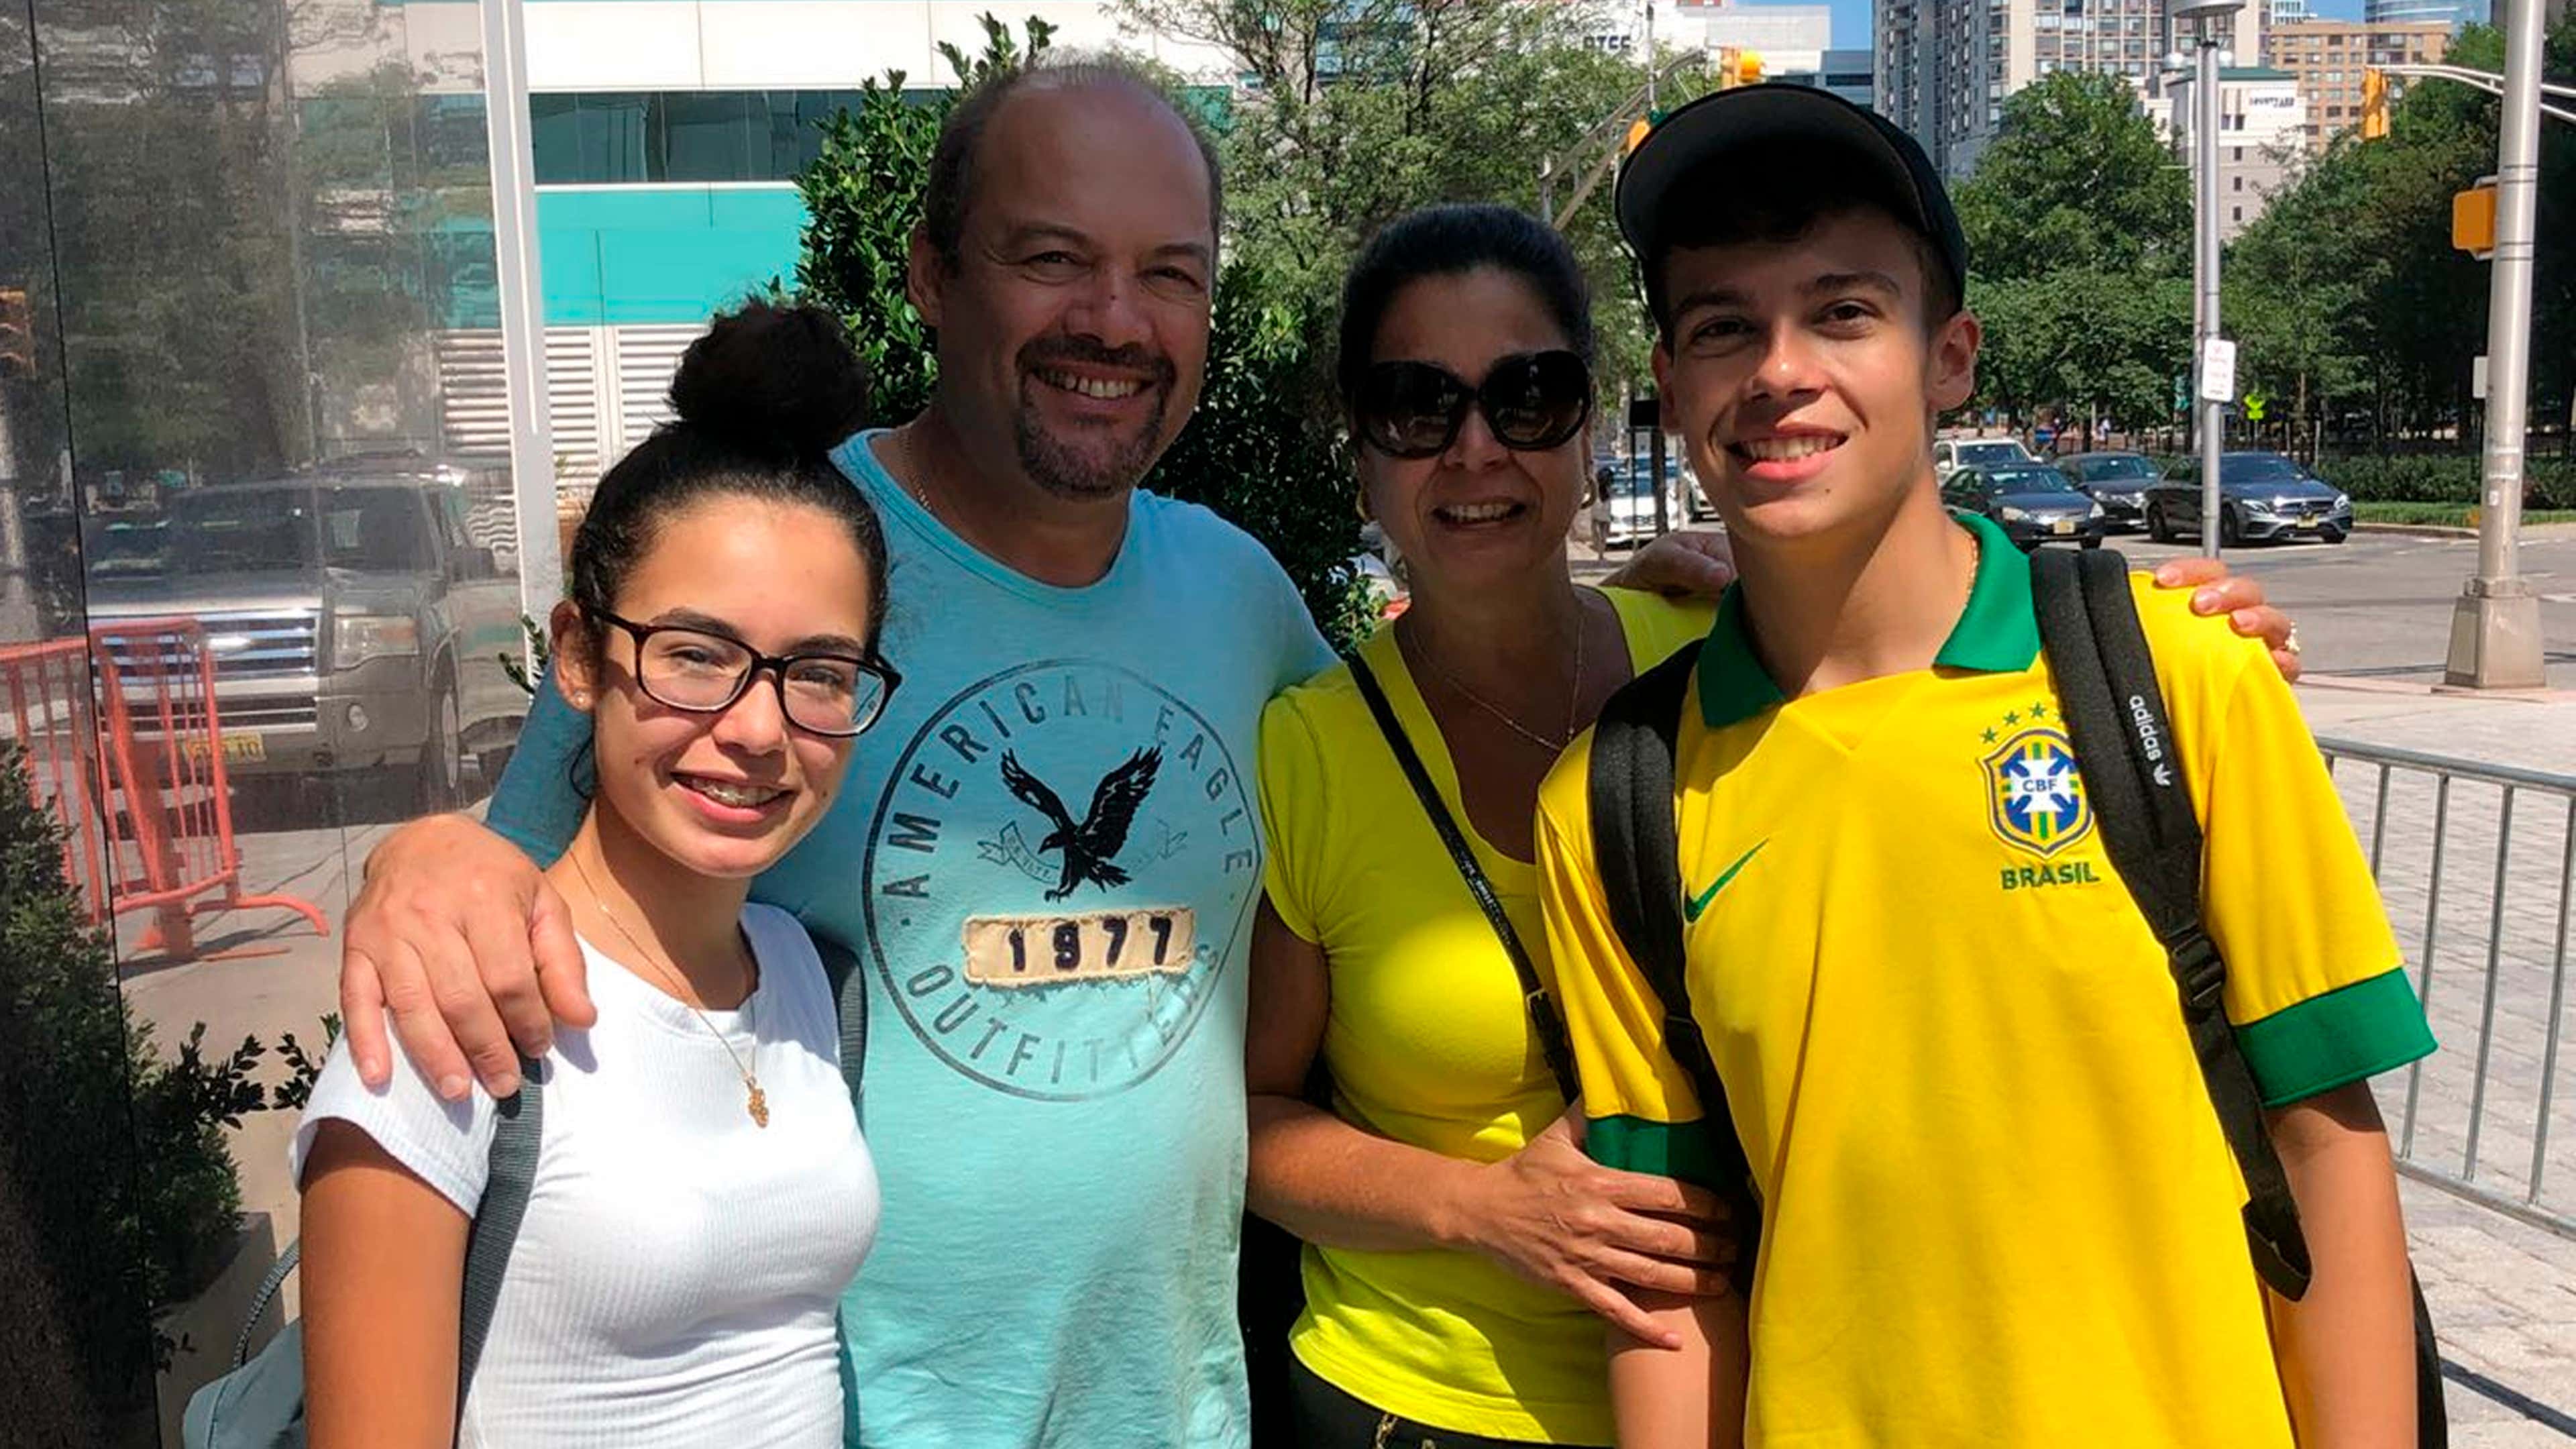 At home abroad: A Selecao bringing Brazilian ex-pats together